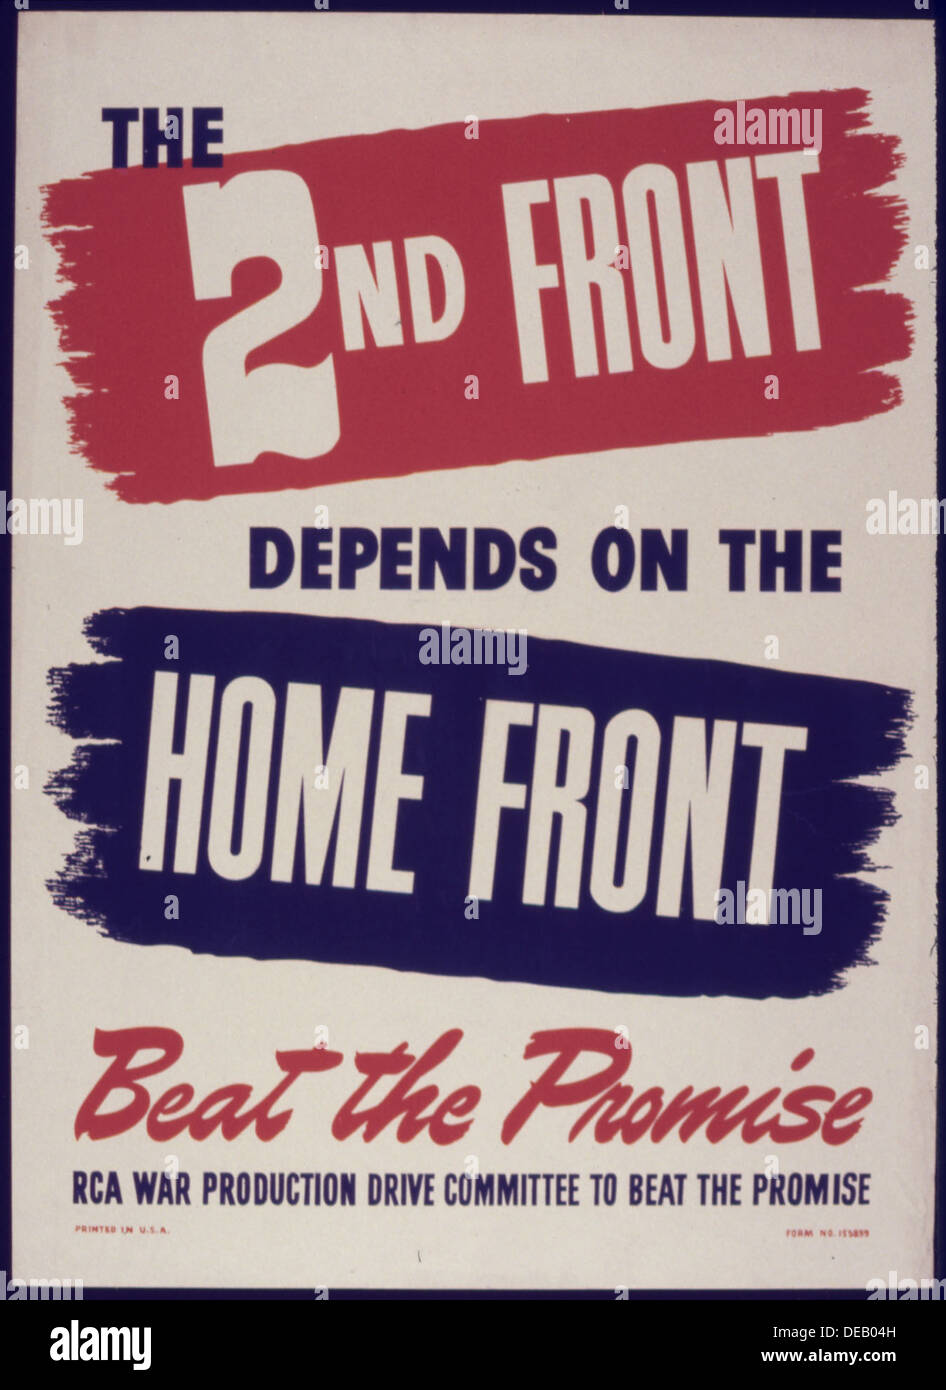 The 2nd Front depends on the Home Front Beat the Promise 534606 Stock Photo